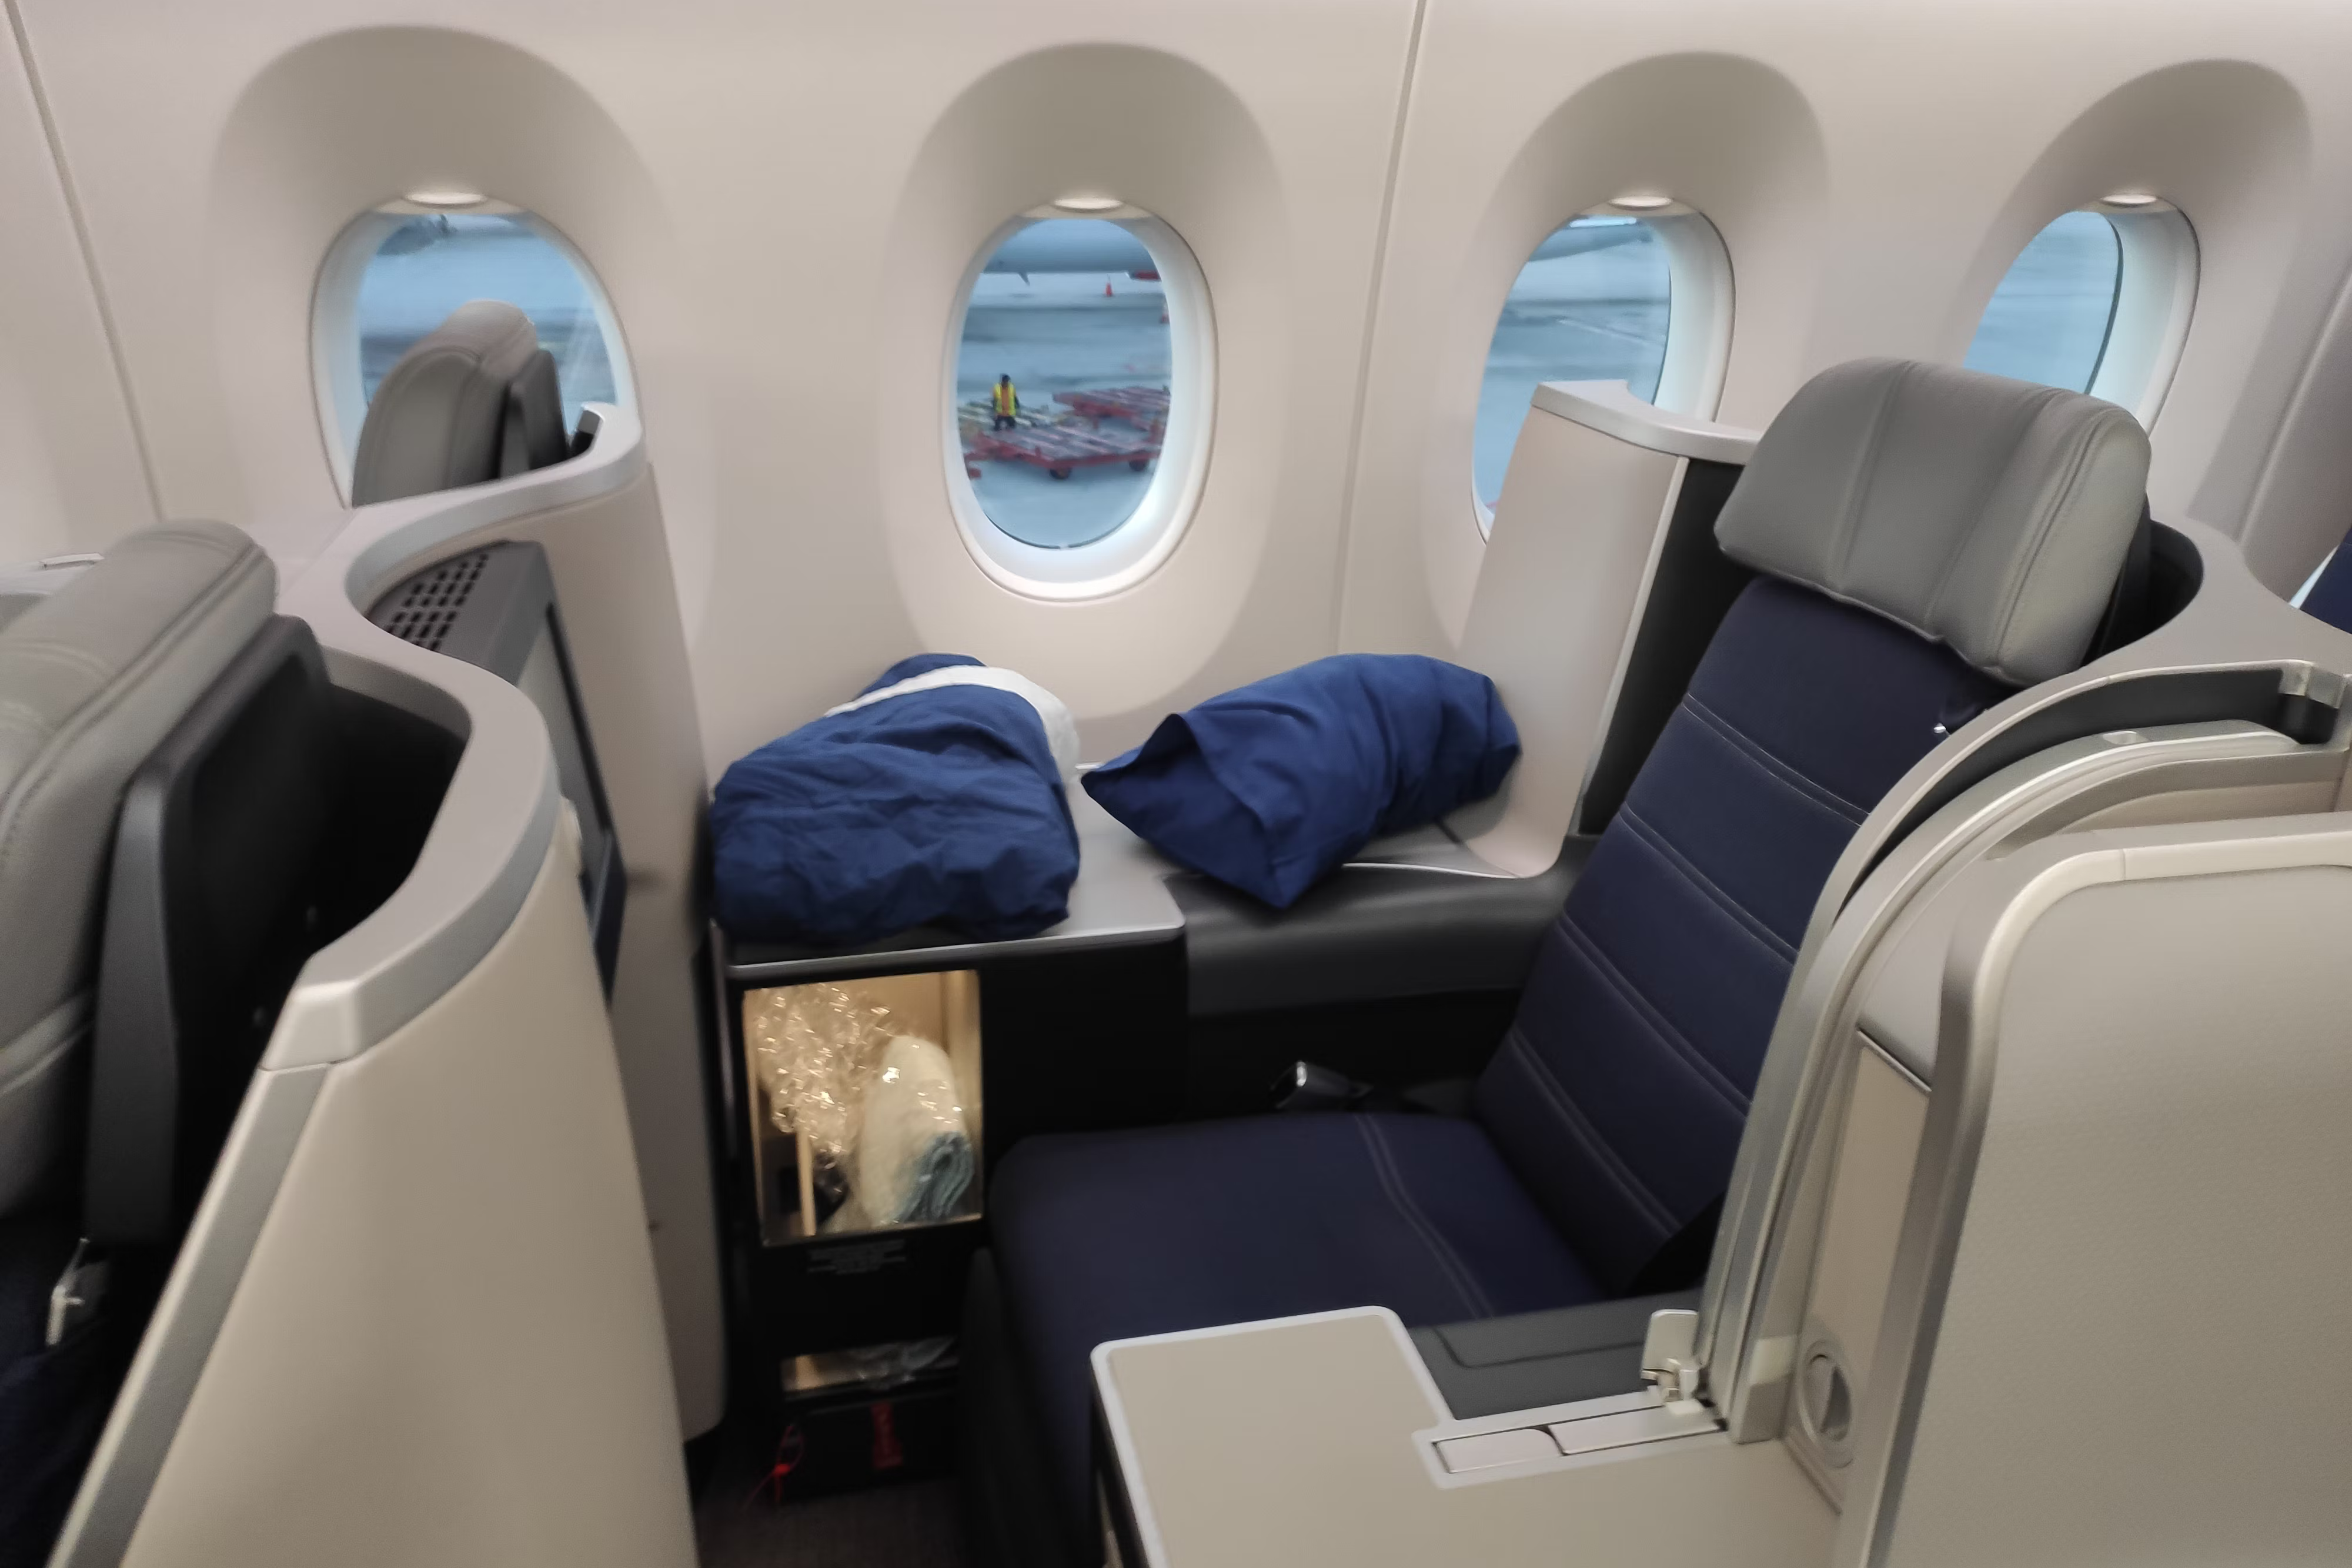 A Malaysia Airlines Airbus A350 business class seat.